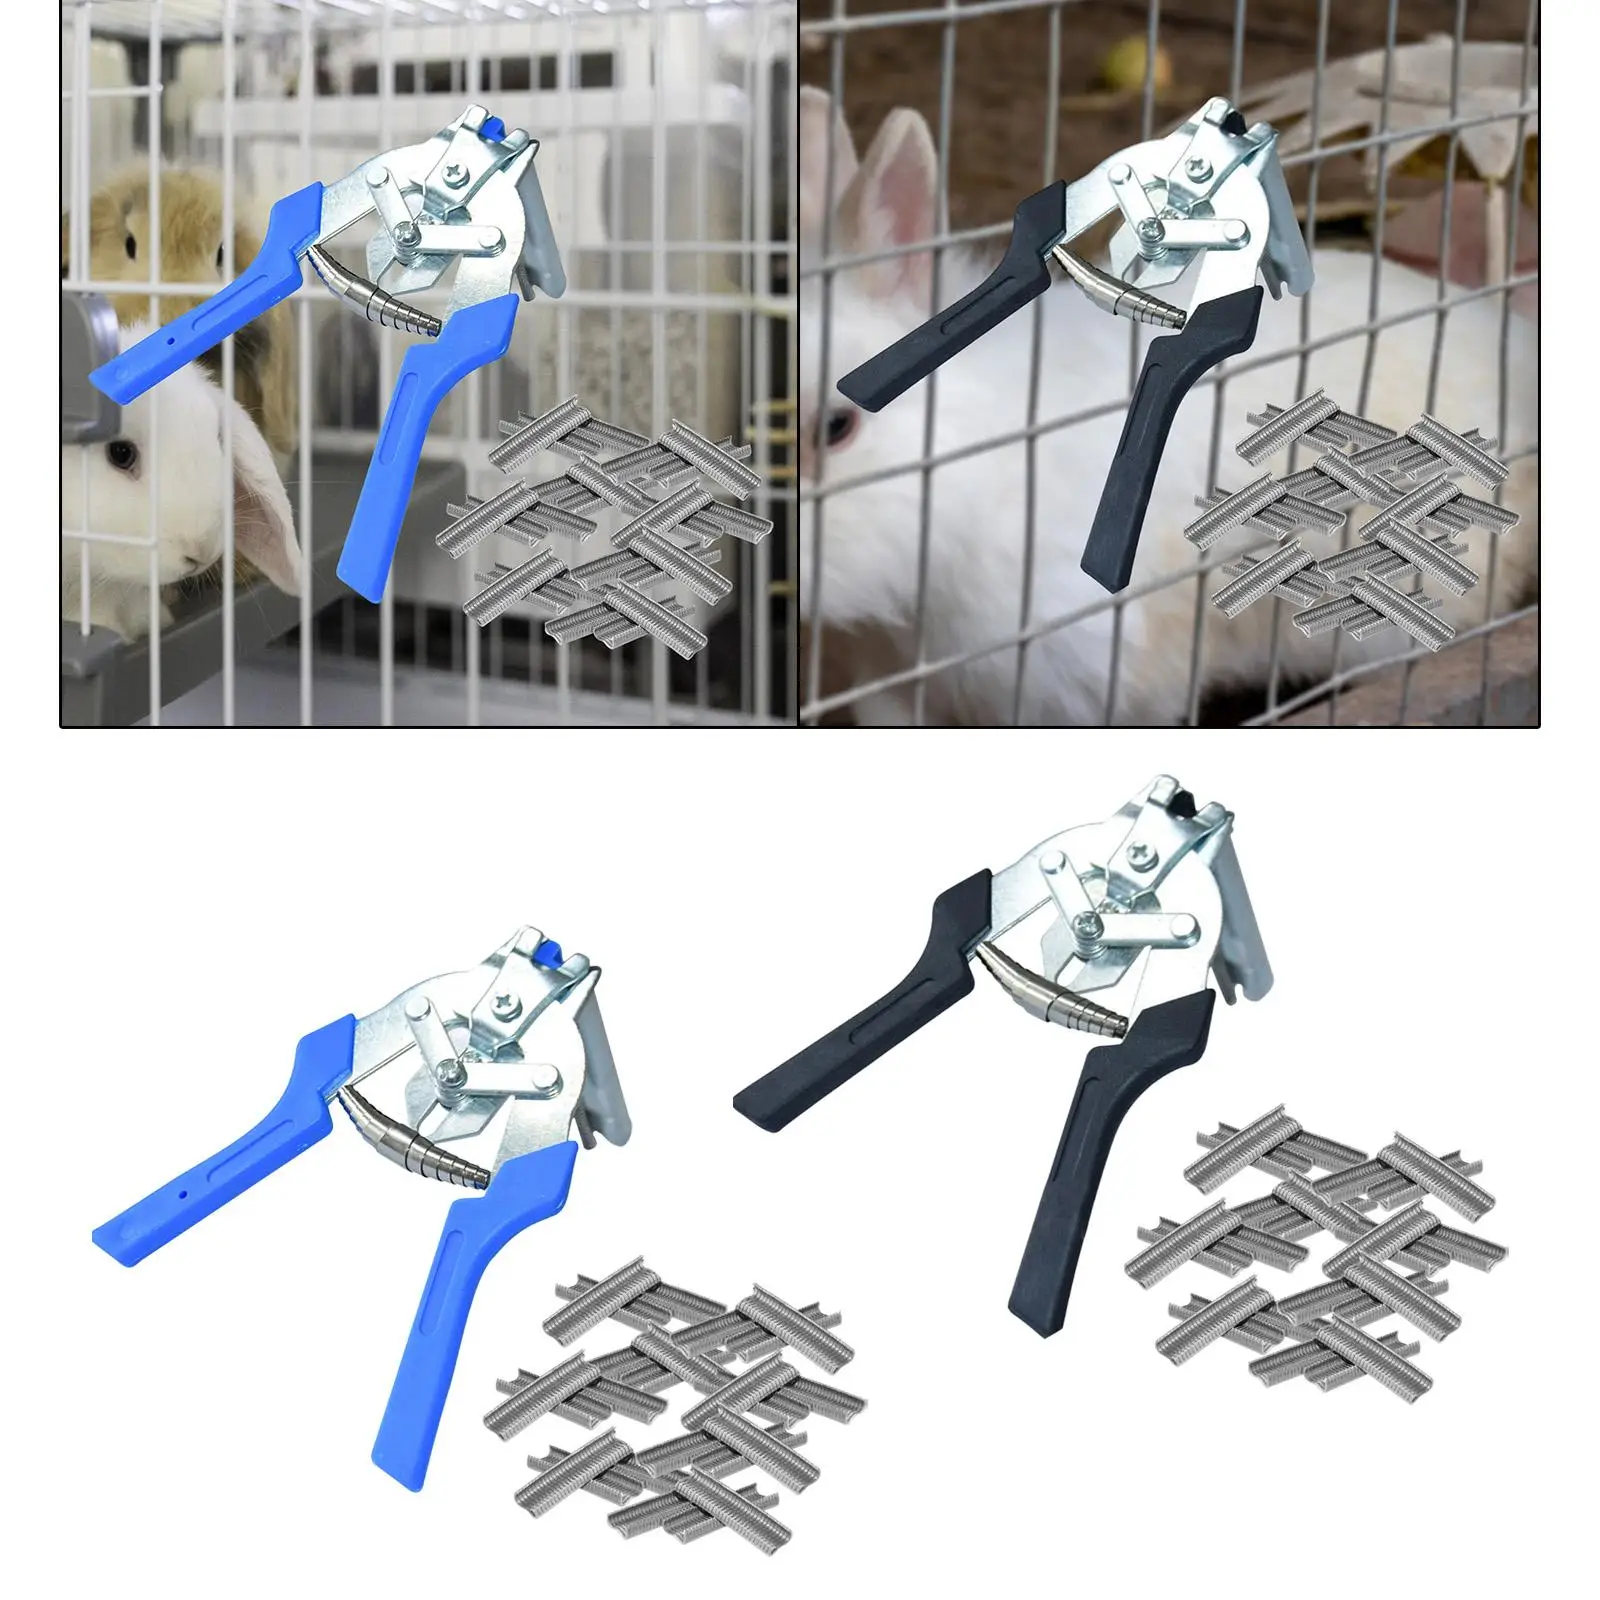 Multifunction Hog Ring Pliers Type clips Pliers Hand Tools with Clips Fastening Plier for Chicken Cage Installation Repair